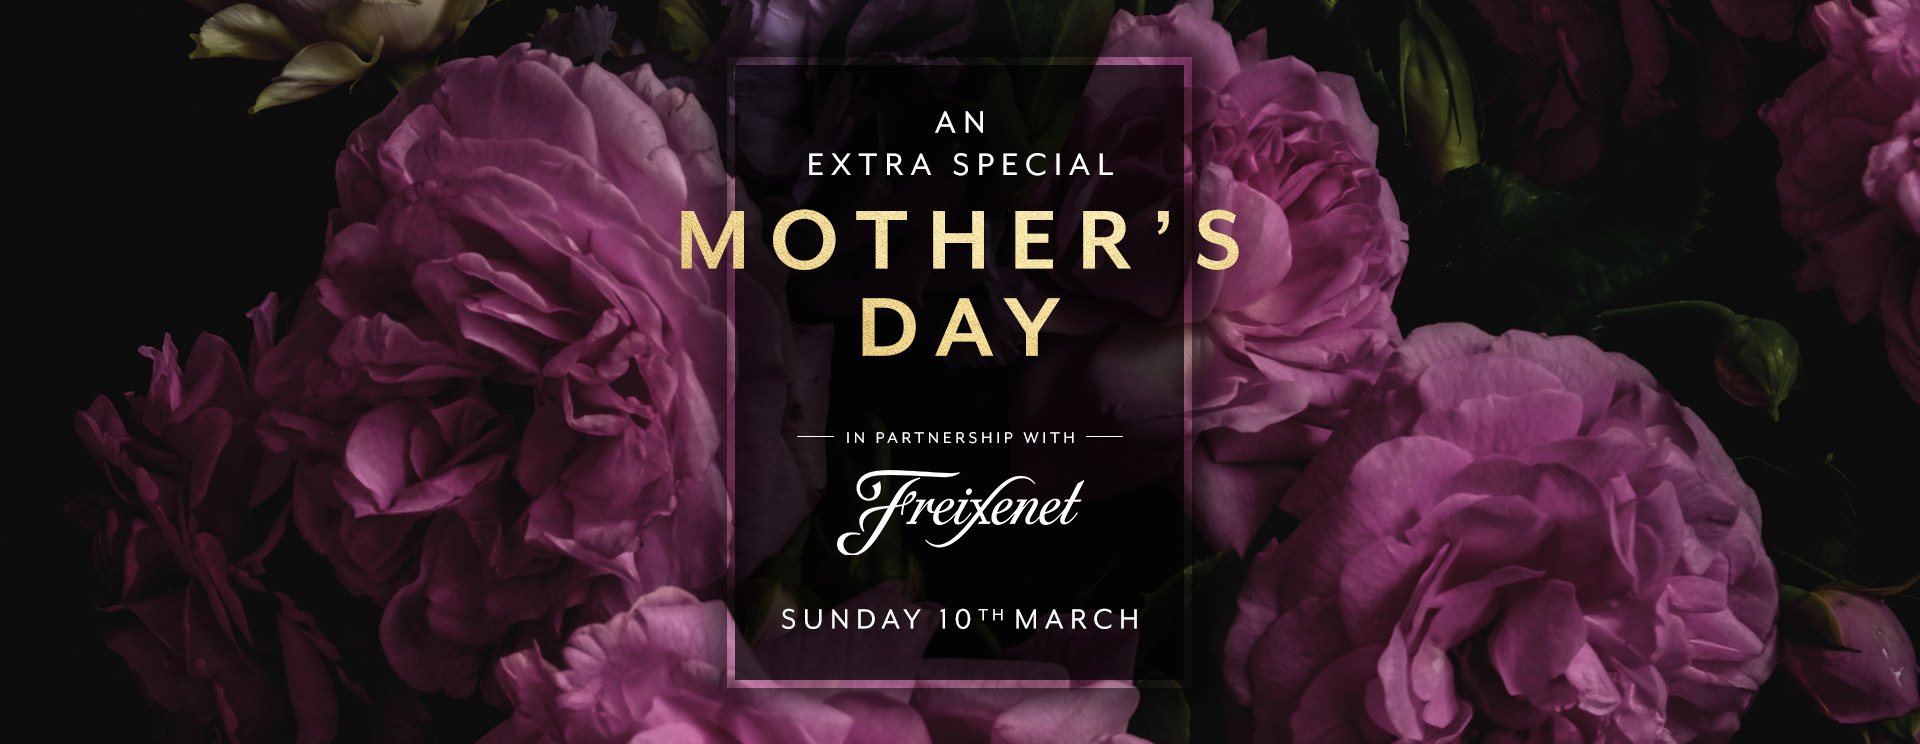 Mother’s Day menu/meal in Trumpington